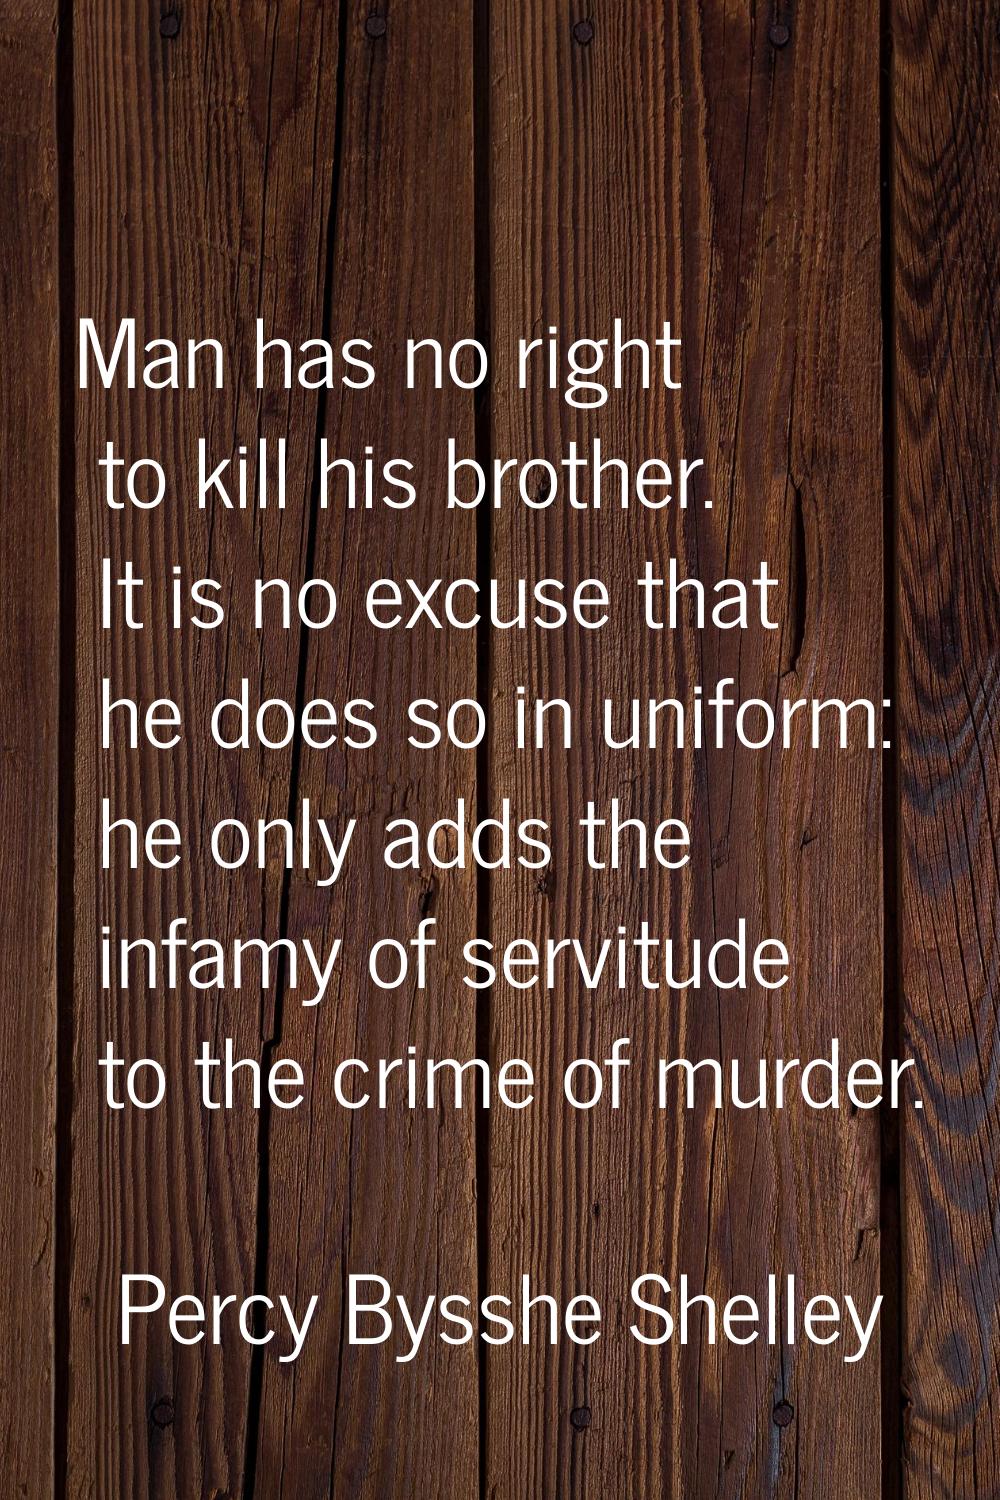 Man has no right to kill his brother. It is no excuse that he does so in uniform: he only adds the 